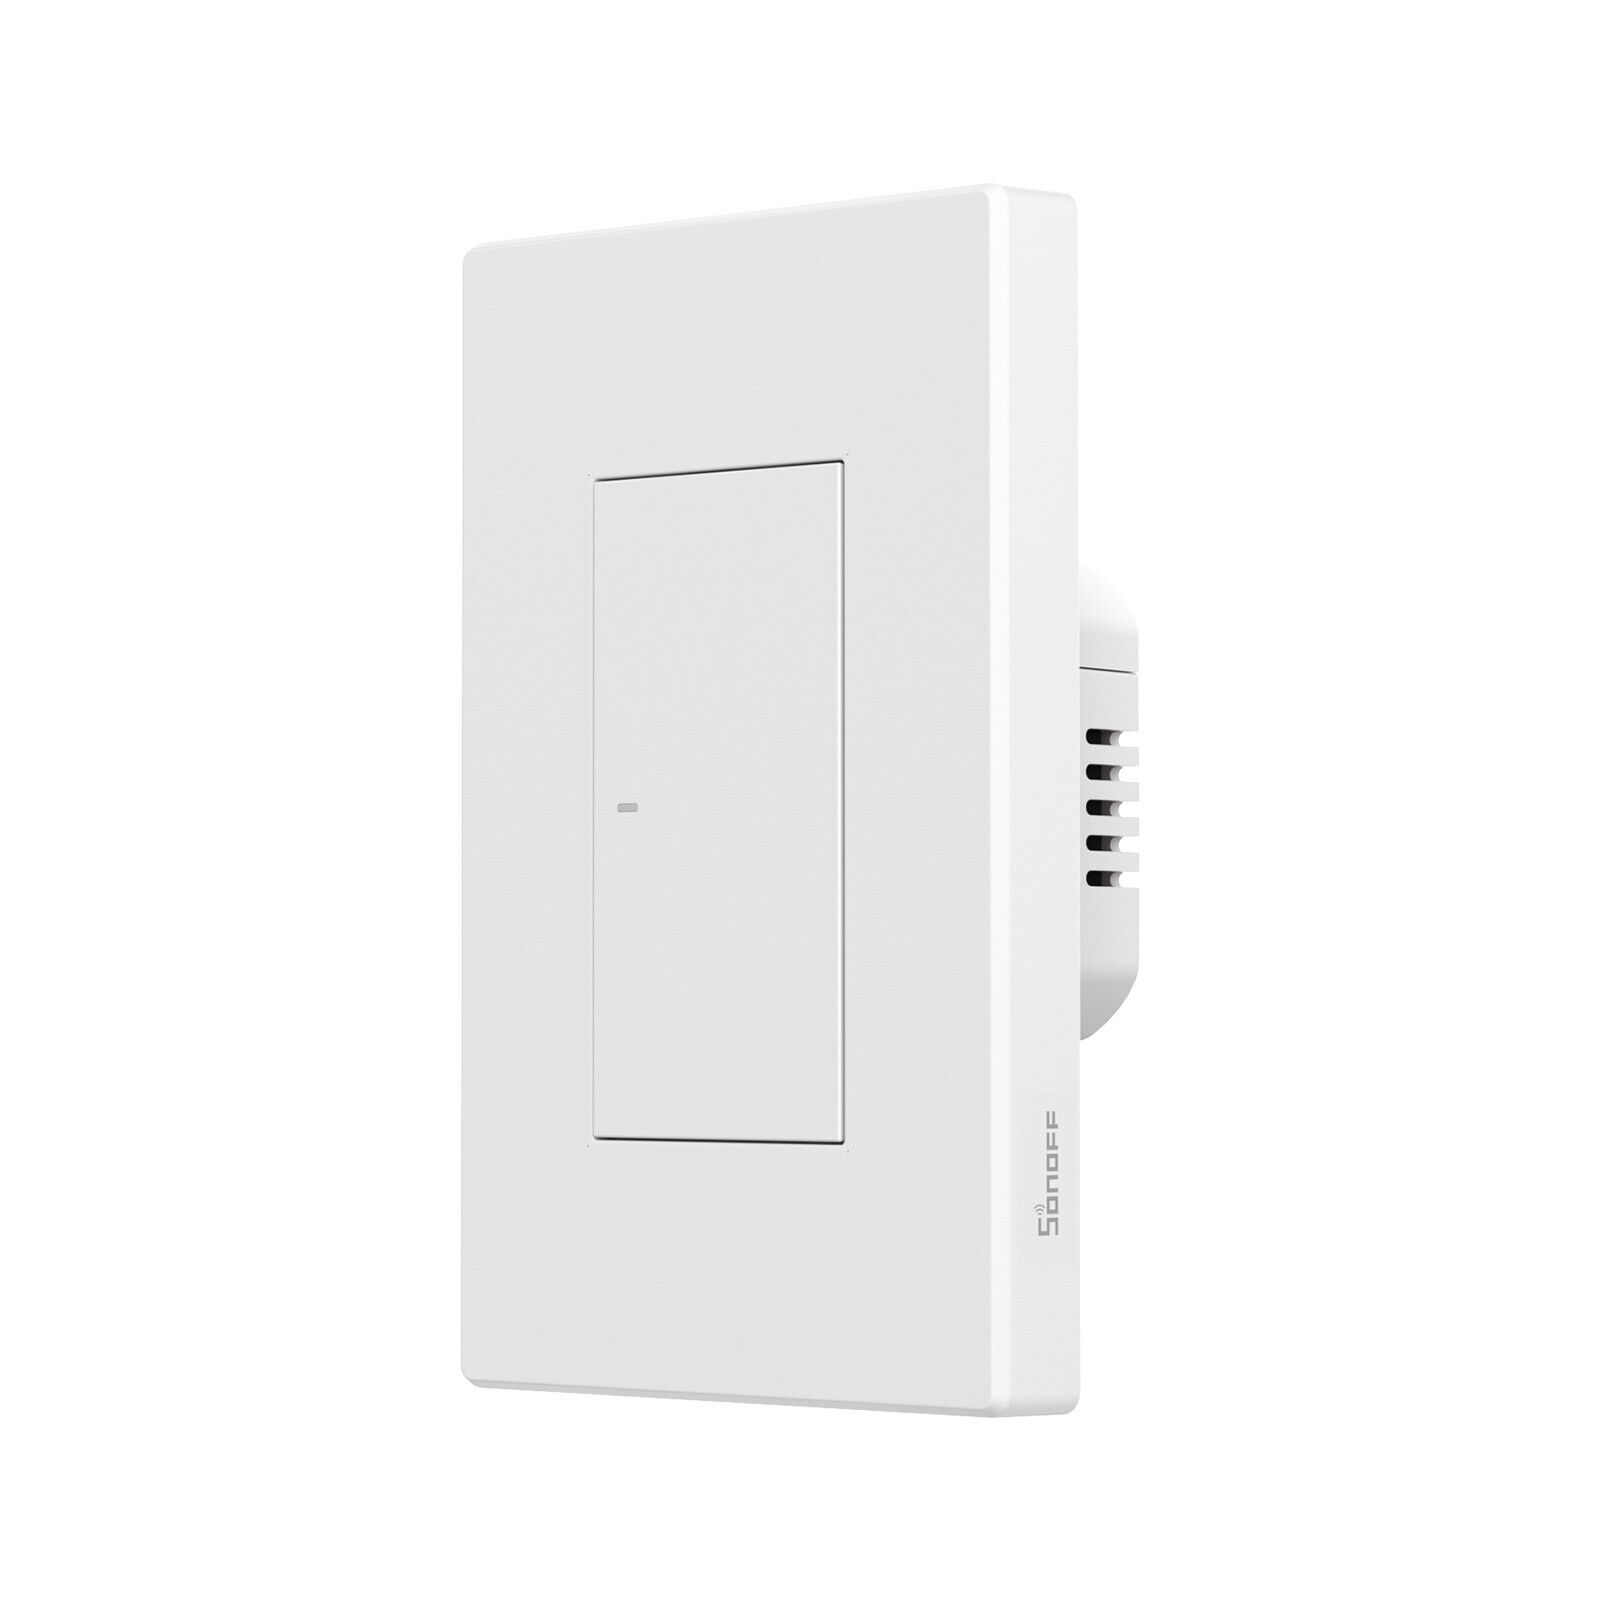 SONOFF M5 Smart Wall Light Switch with Matter Works with Apple Home,Amazon Alexa